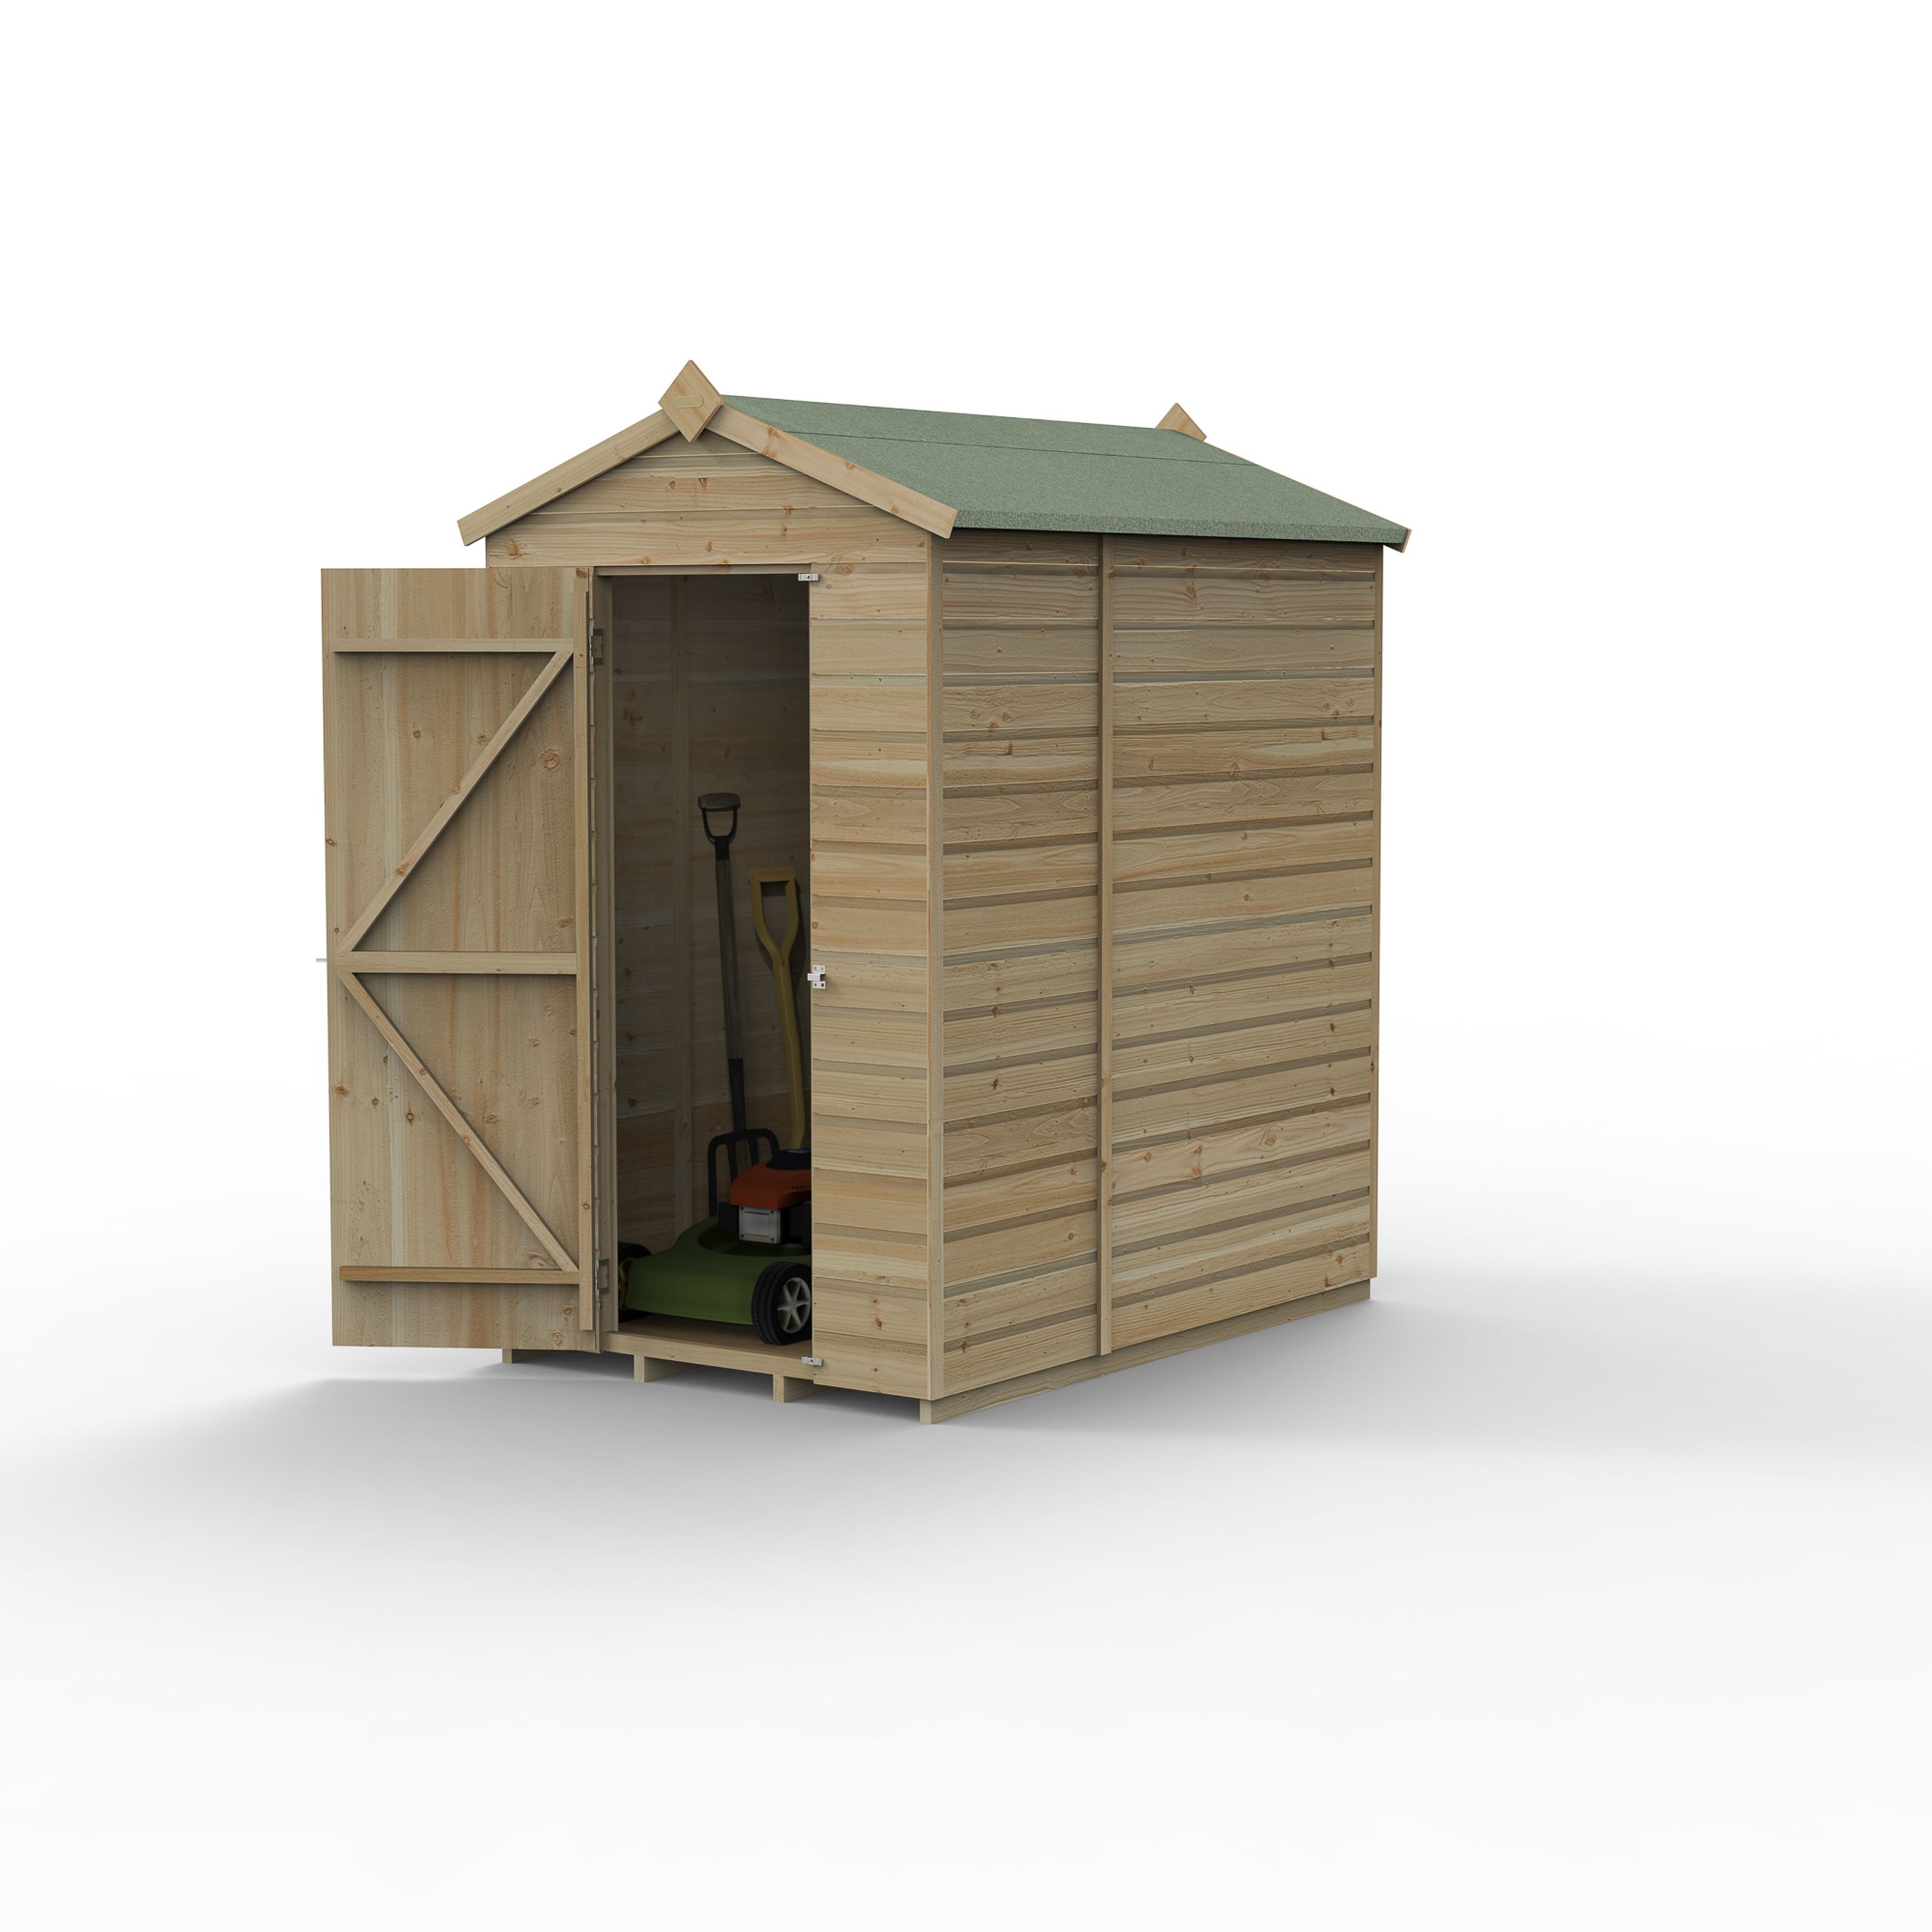 Forest Garden Beckwood 6x4 ft Apex Natural timber Wooden Shed with floor (Base included)